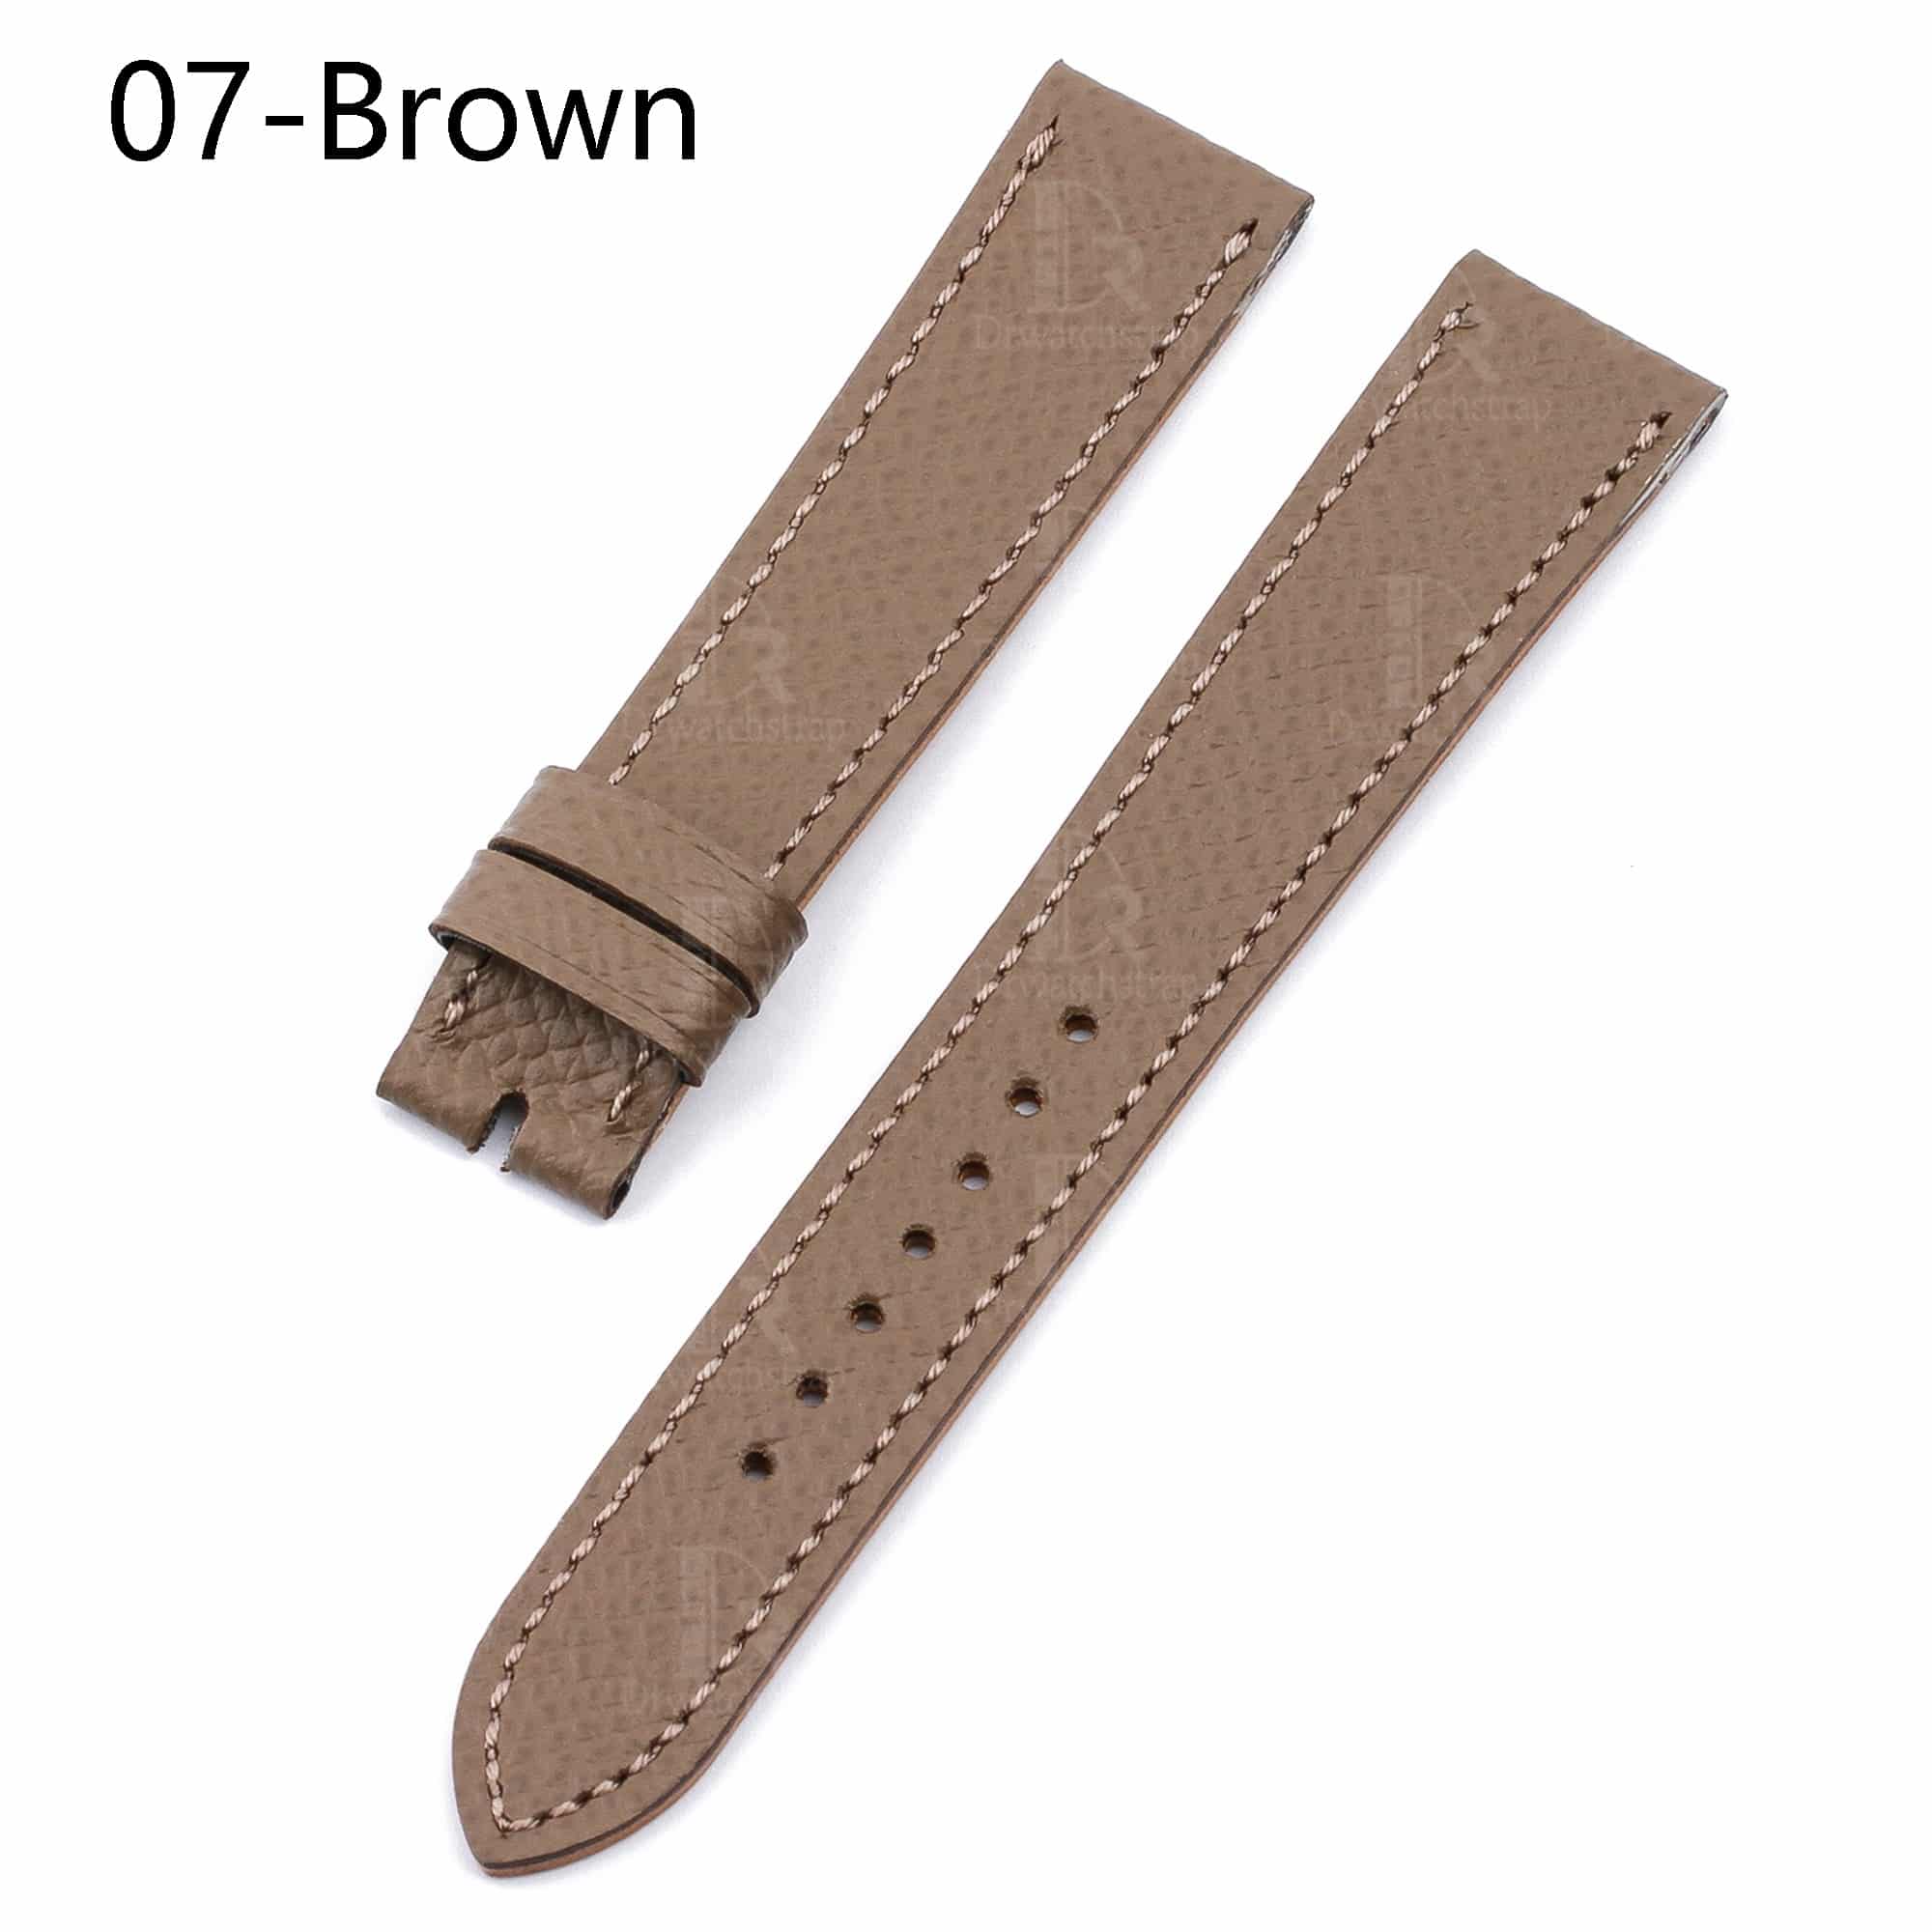 Hermes cape cod watch strap Brown Single tour sport band replacement for sale